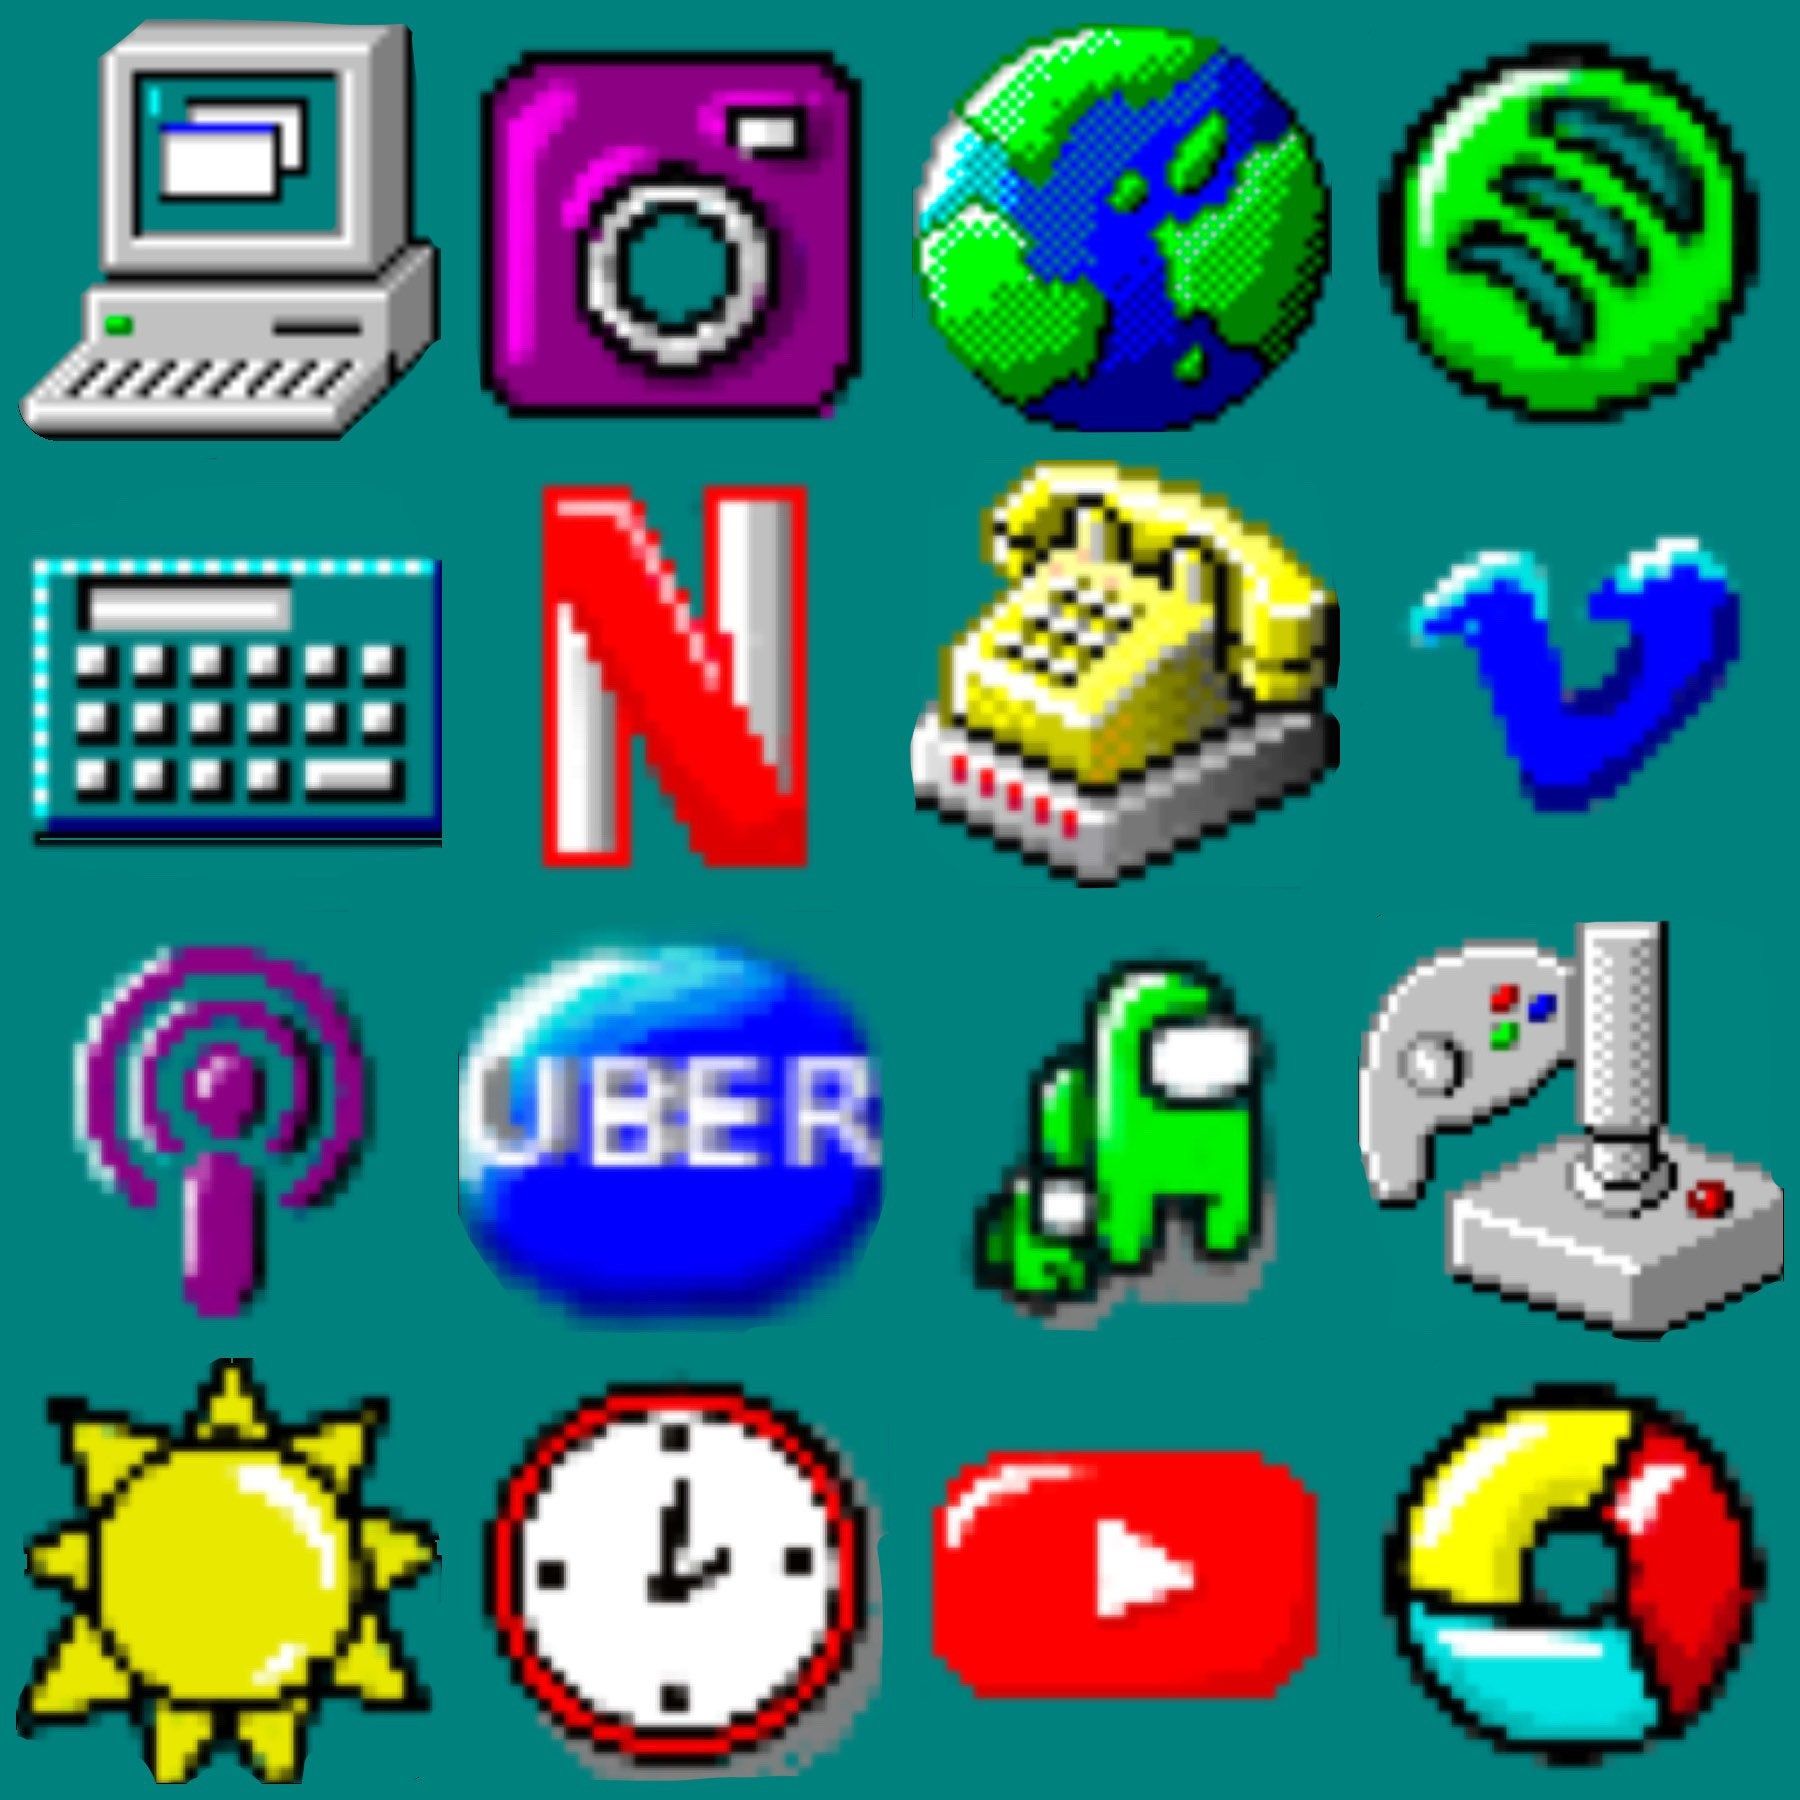 Some of the icons that are part of the collection - Windows 98